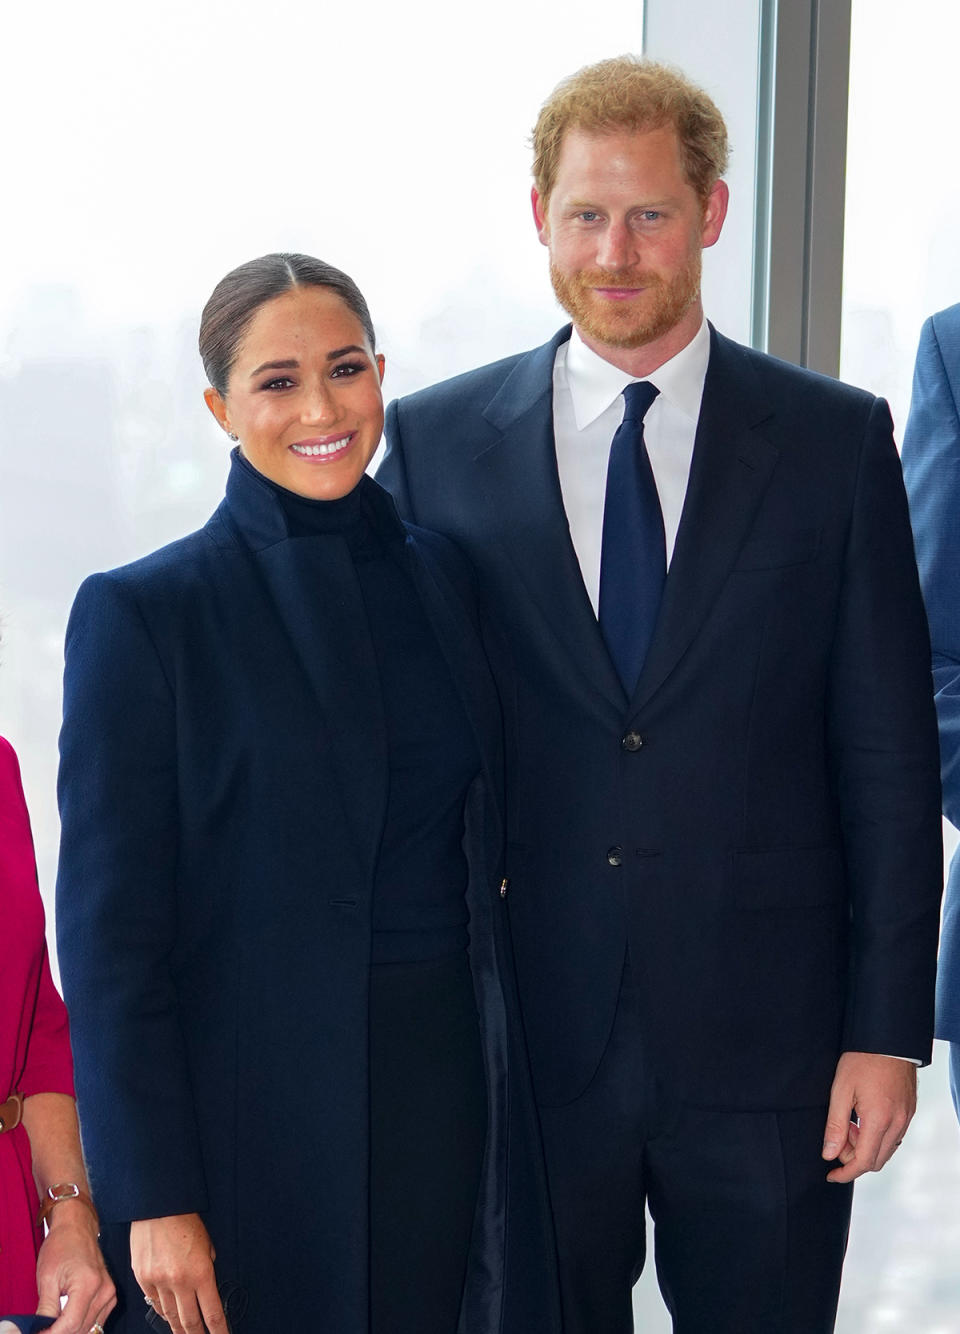 Prince Harry and Meghan Markle at One World Trade Center Observatory in New York, 